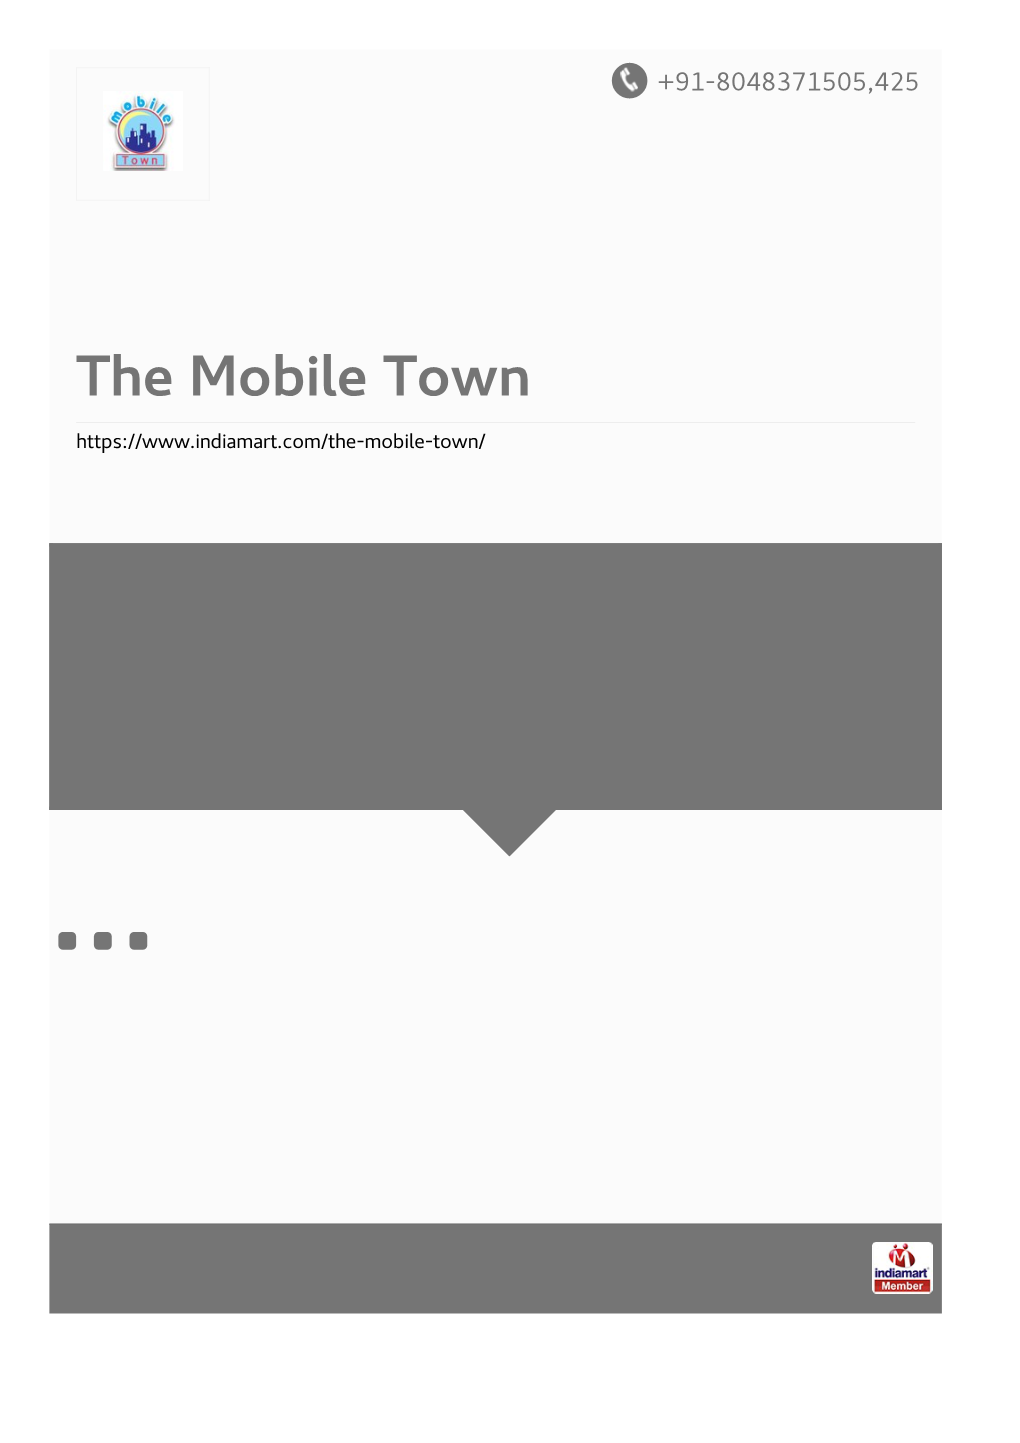 The Mobile Town About Us